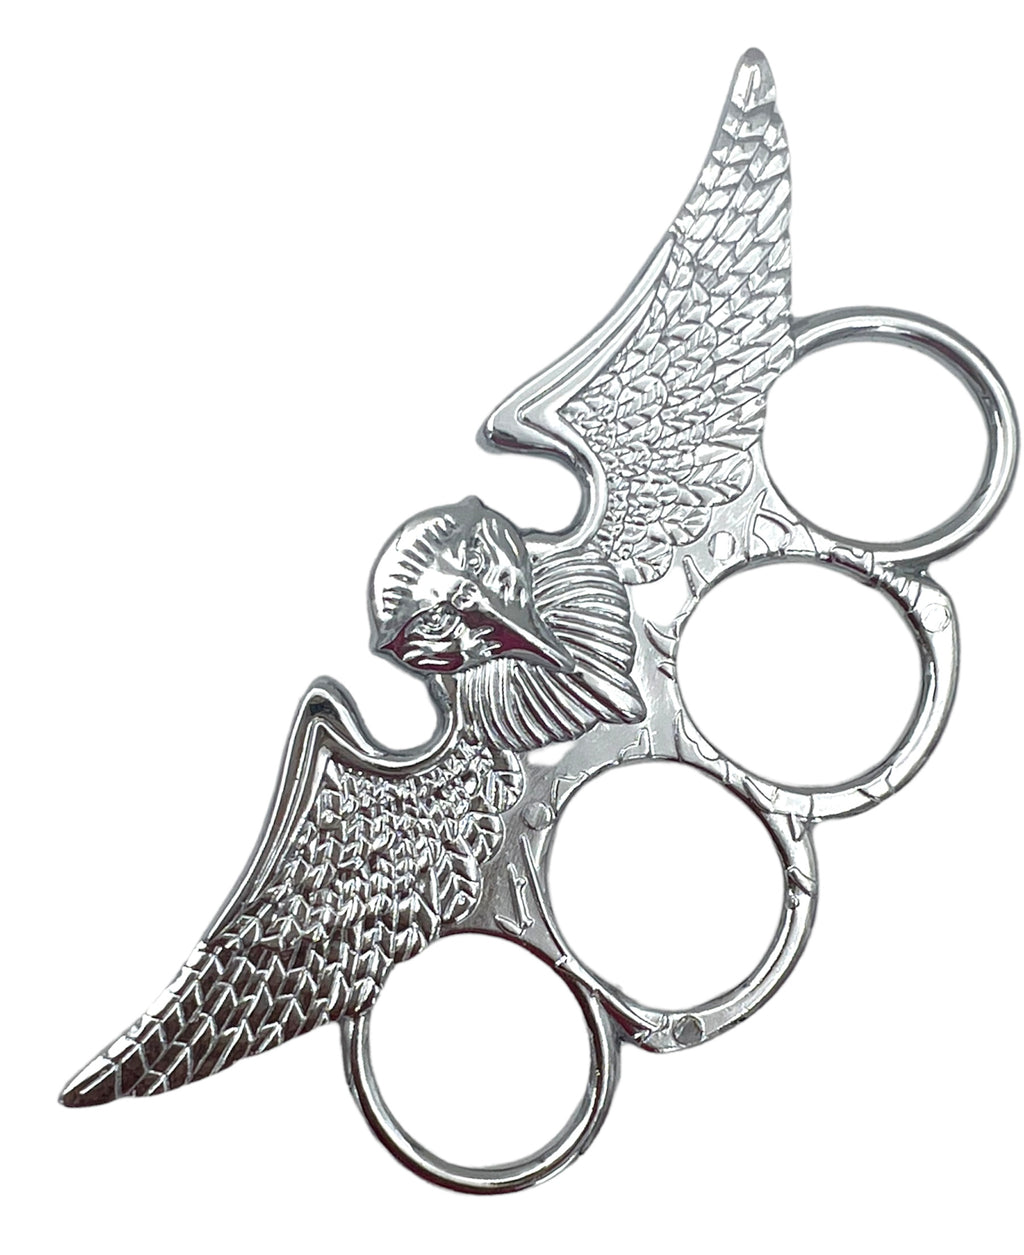 Winged Eagle Belt Buckle Paper Weight - SILVER